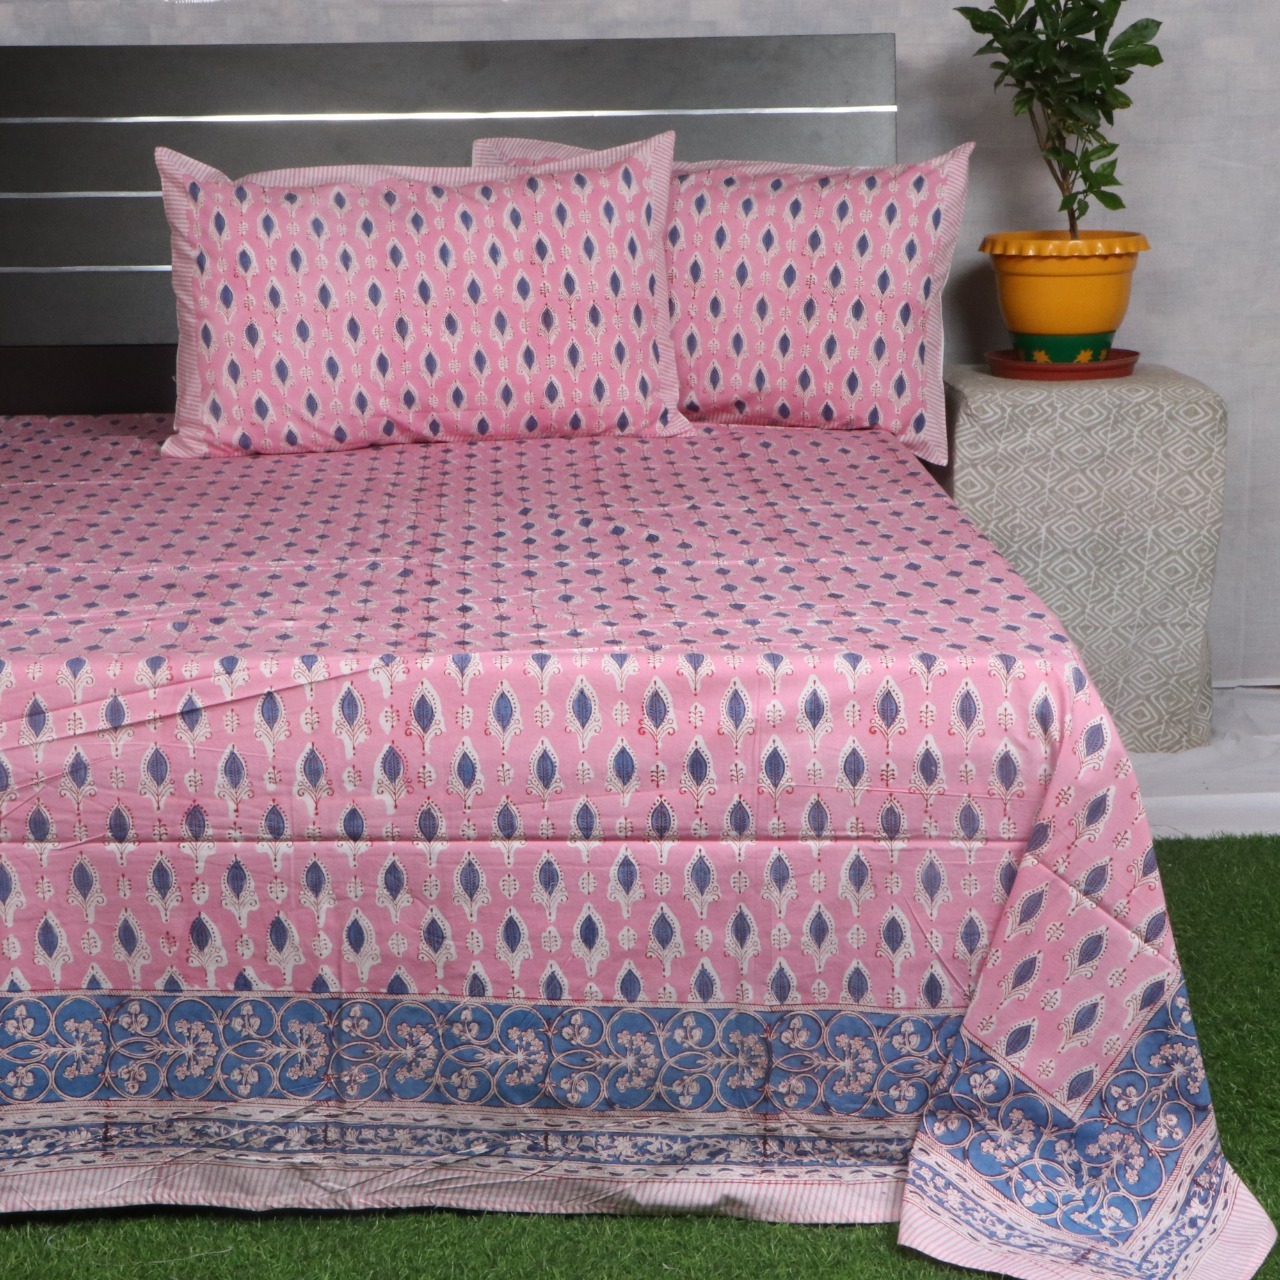 Hand block printed cotton bedsheets